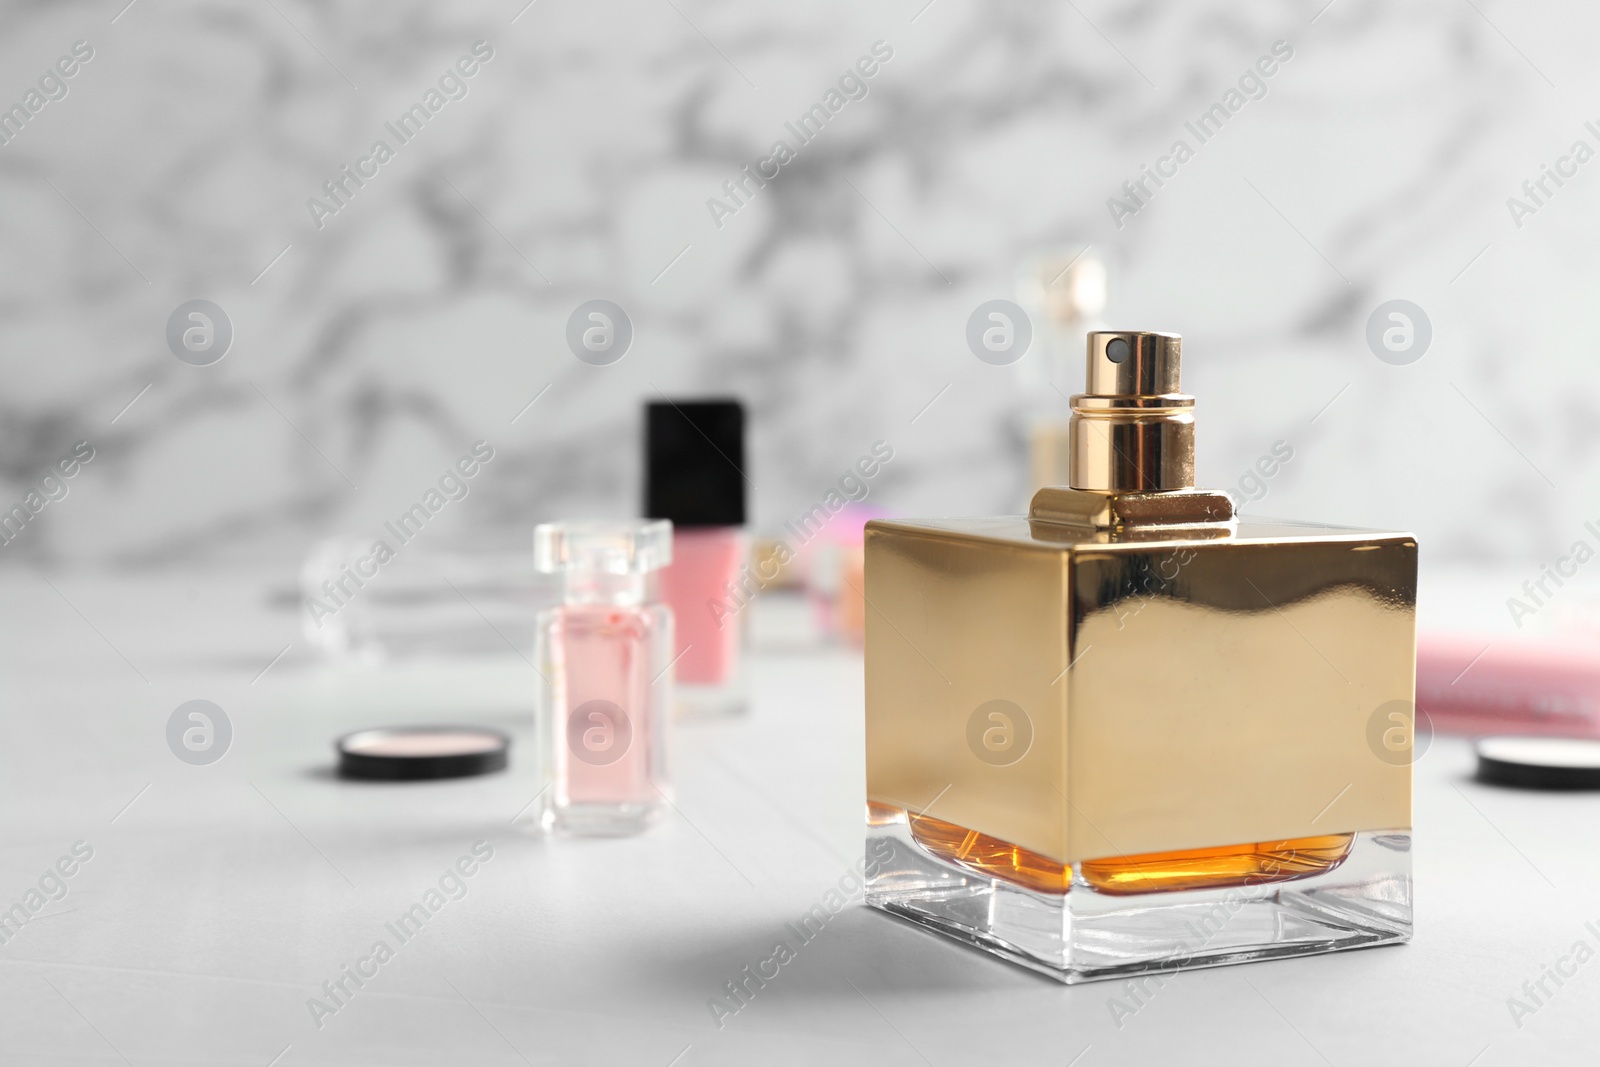 Photo of Bottle of perfume on table against marble background. Space for text